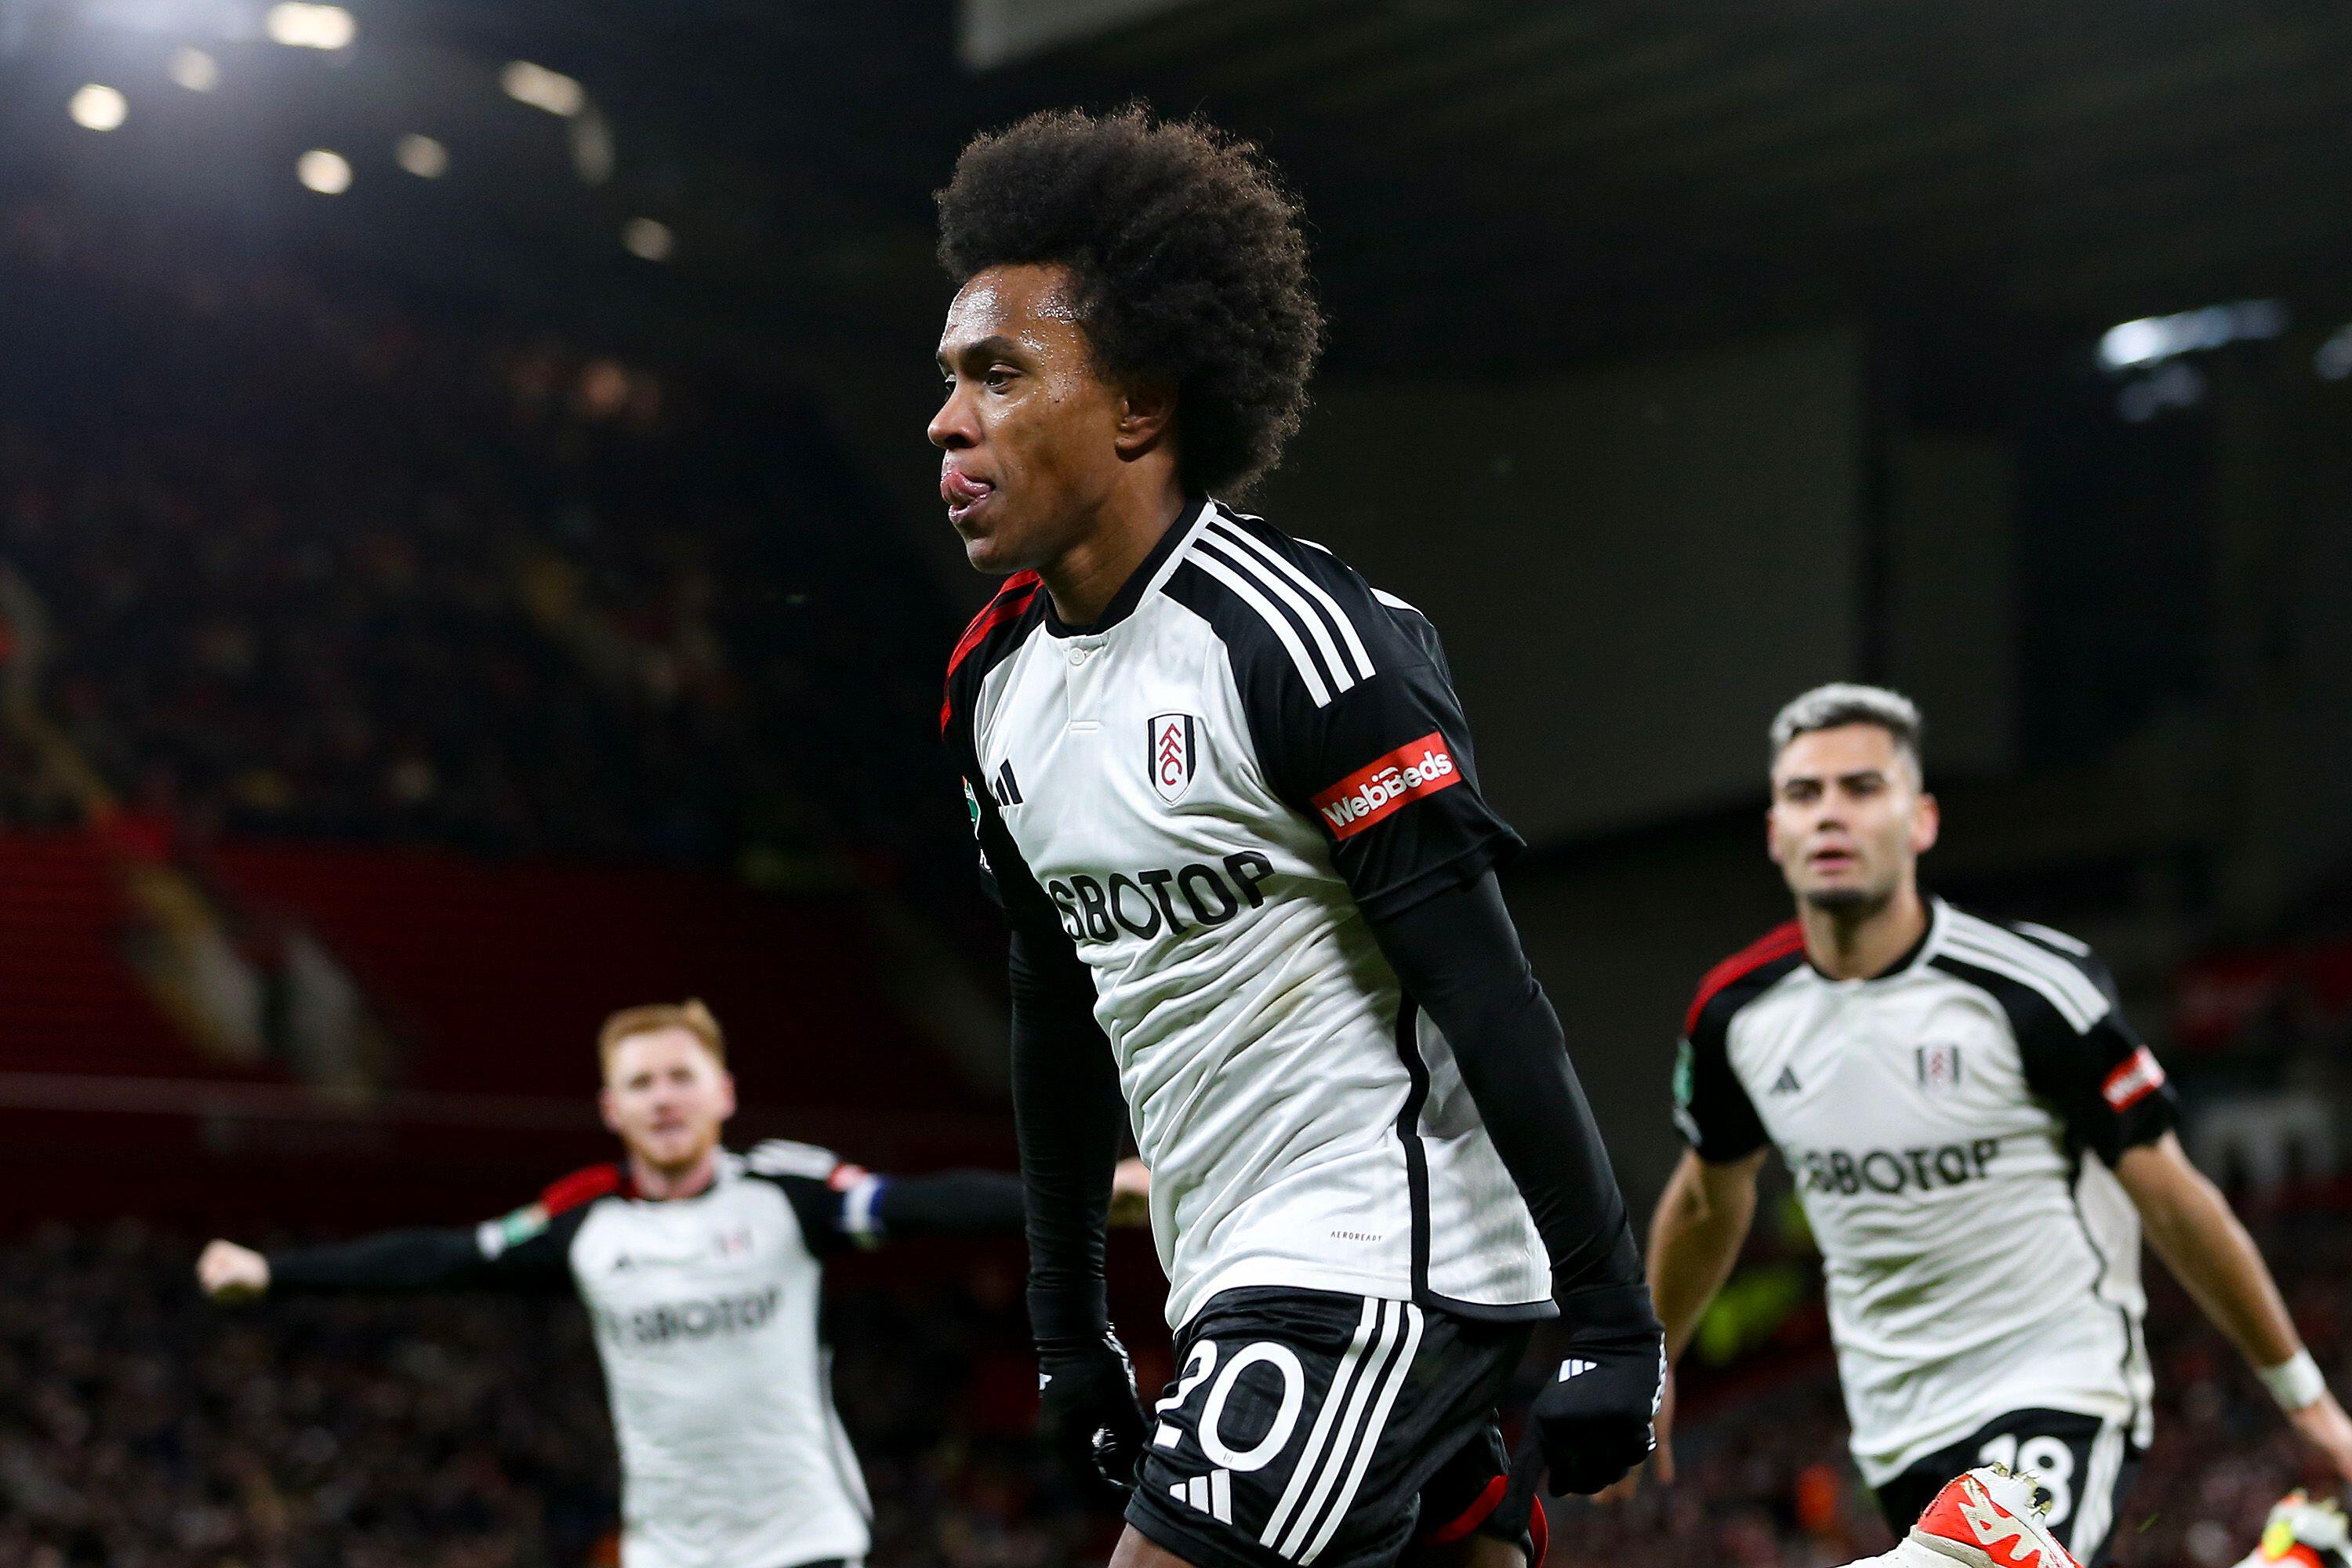 Willian opened the scoring before Liverpool fought back to win